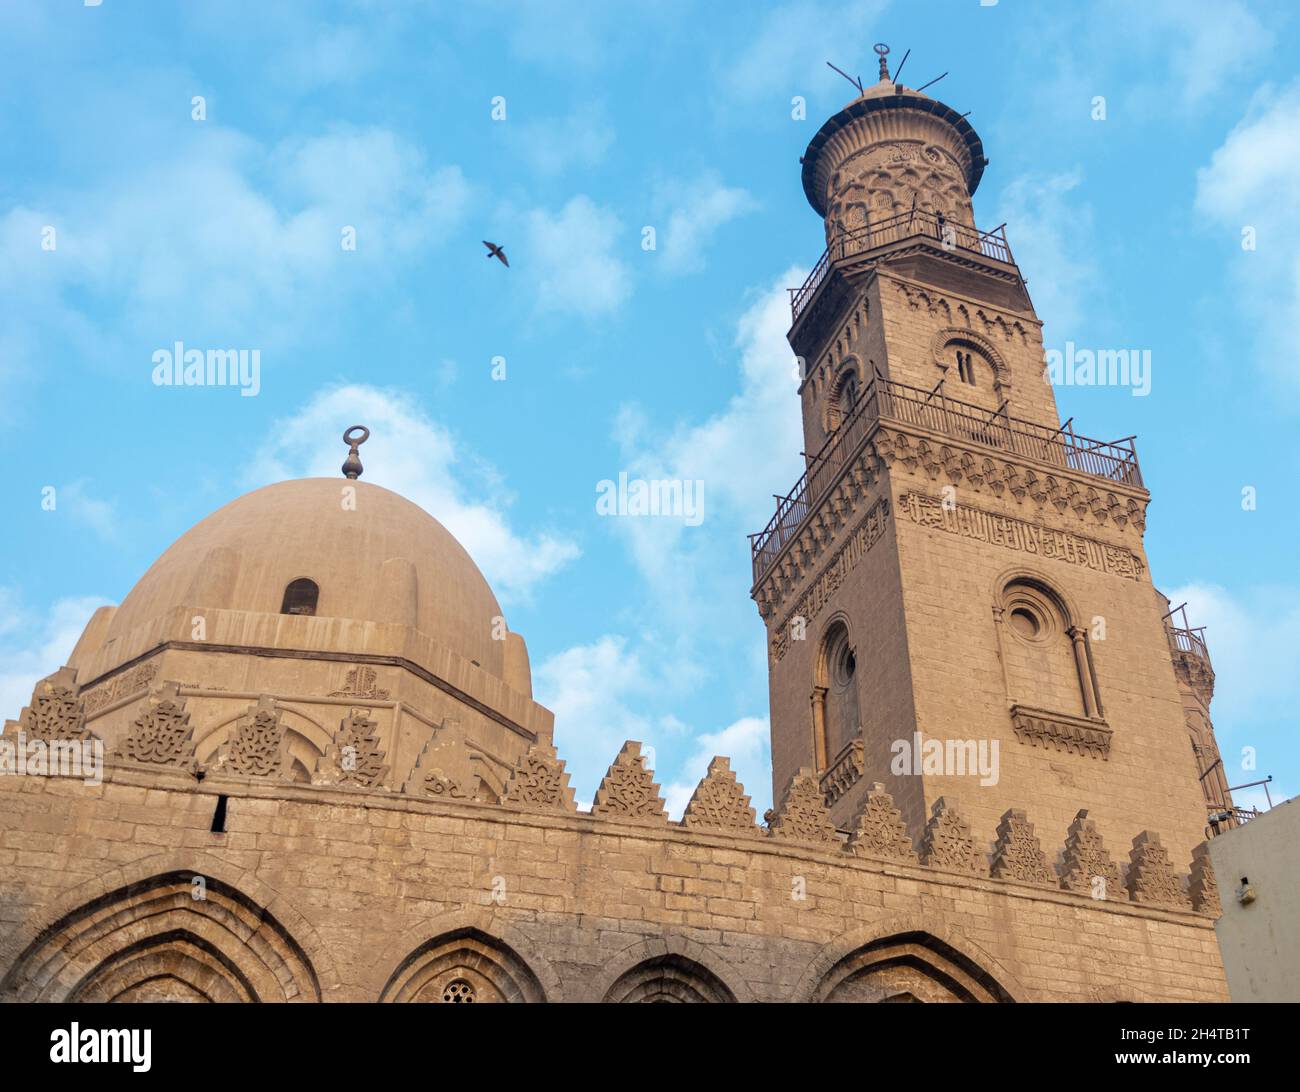 The Qalawun Complex in Cairo, Egypt Stock Photo